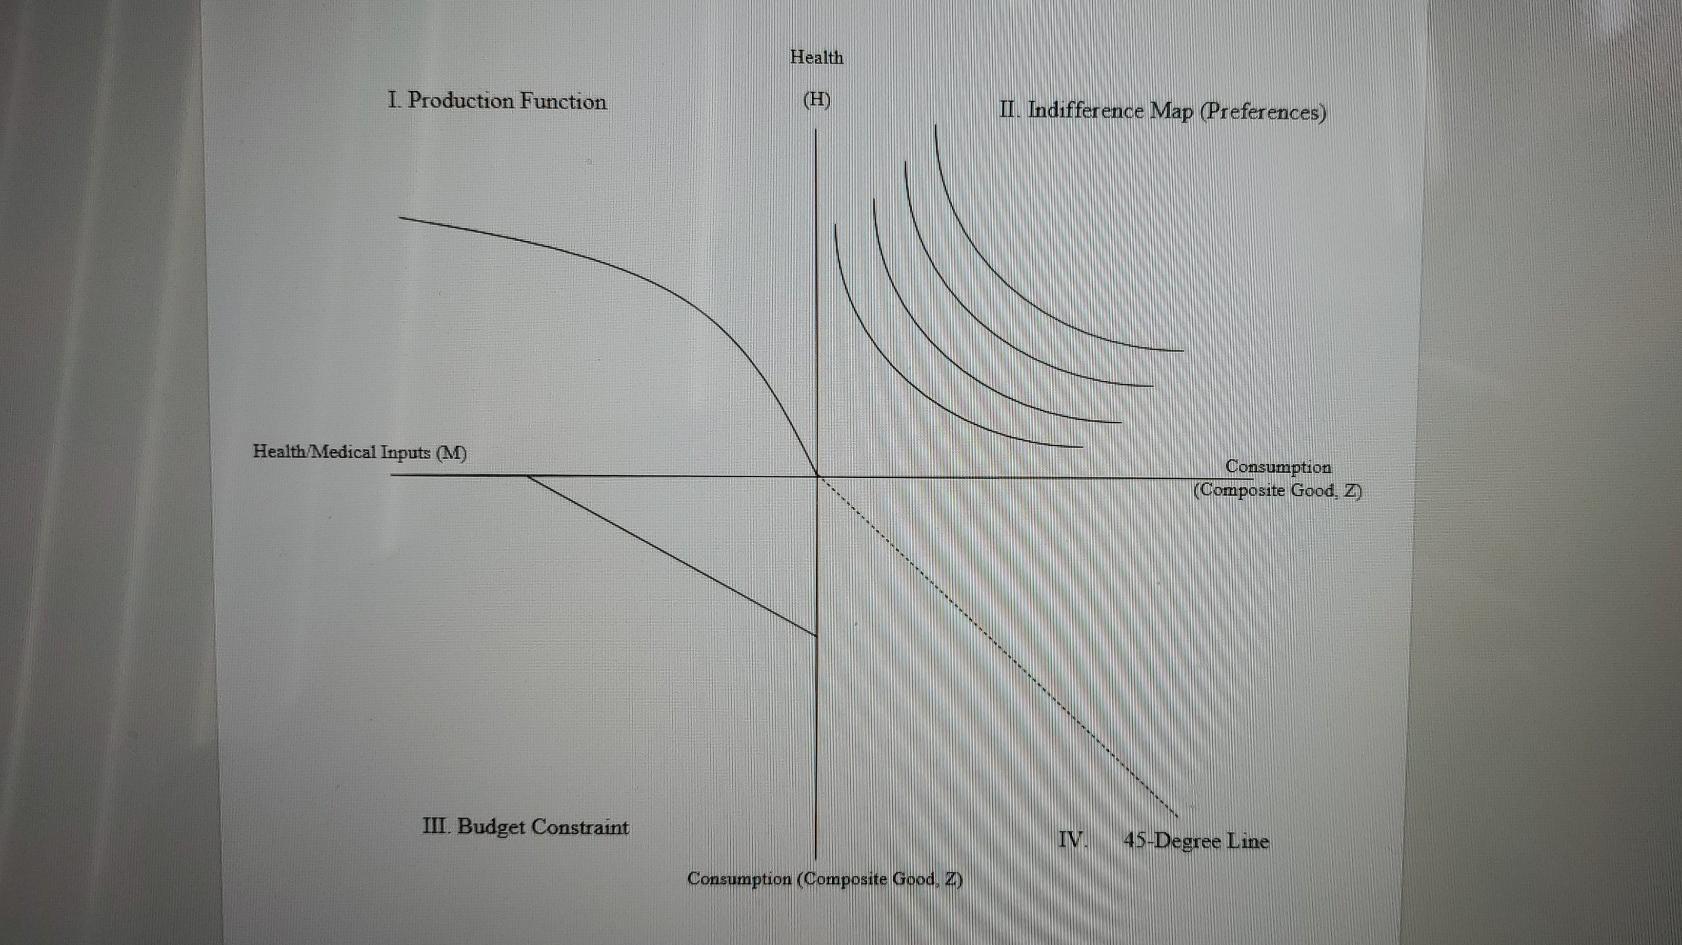 Health I Production Function (H) II. Indifference Map (Preferences) Health/Medical Inputs (M) Consumption (Composite Good, Z)